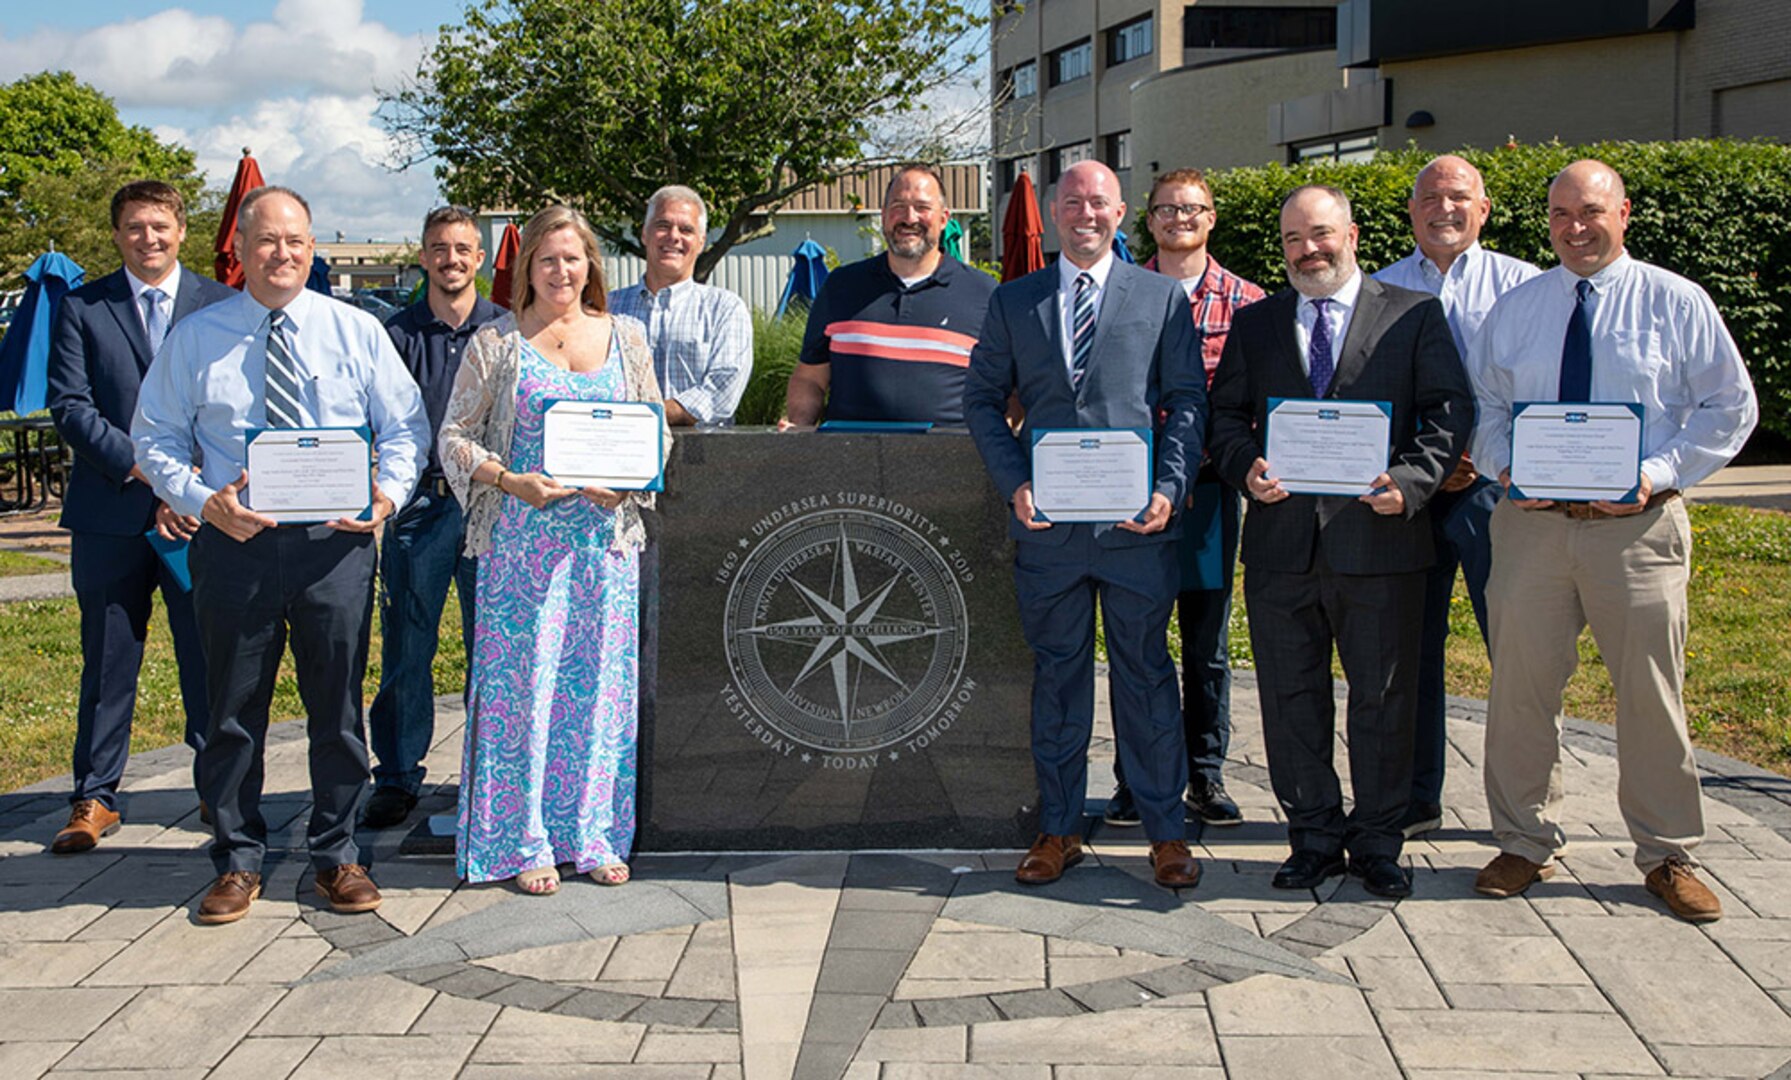 2021 Annual Awards ceremony highlights critical work done by NUWC Division Newport employees to support the fleet